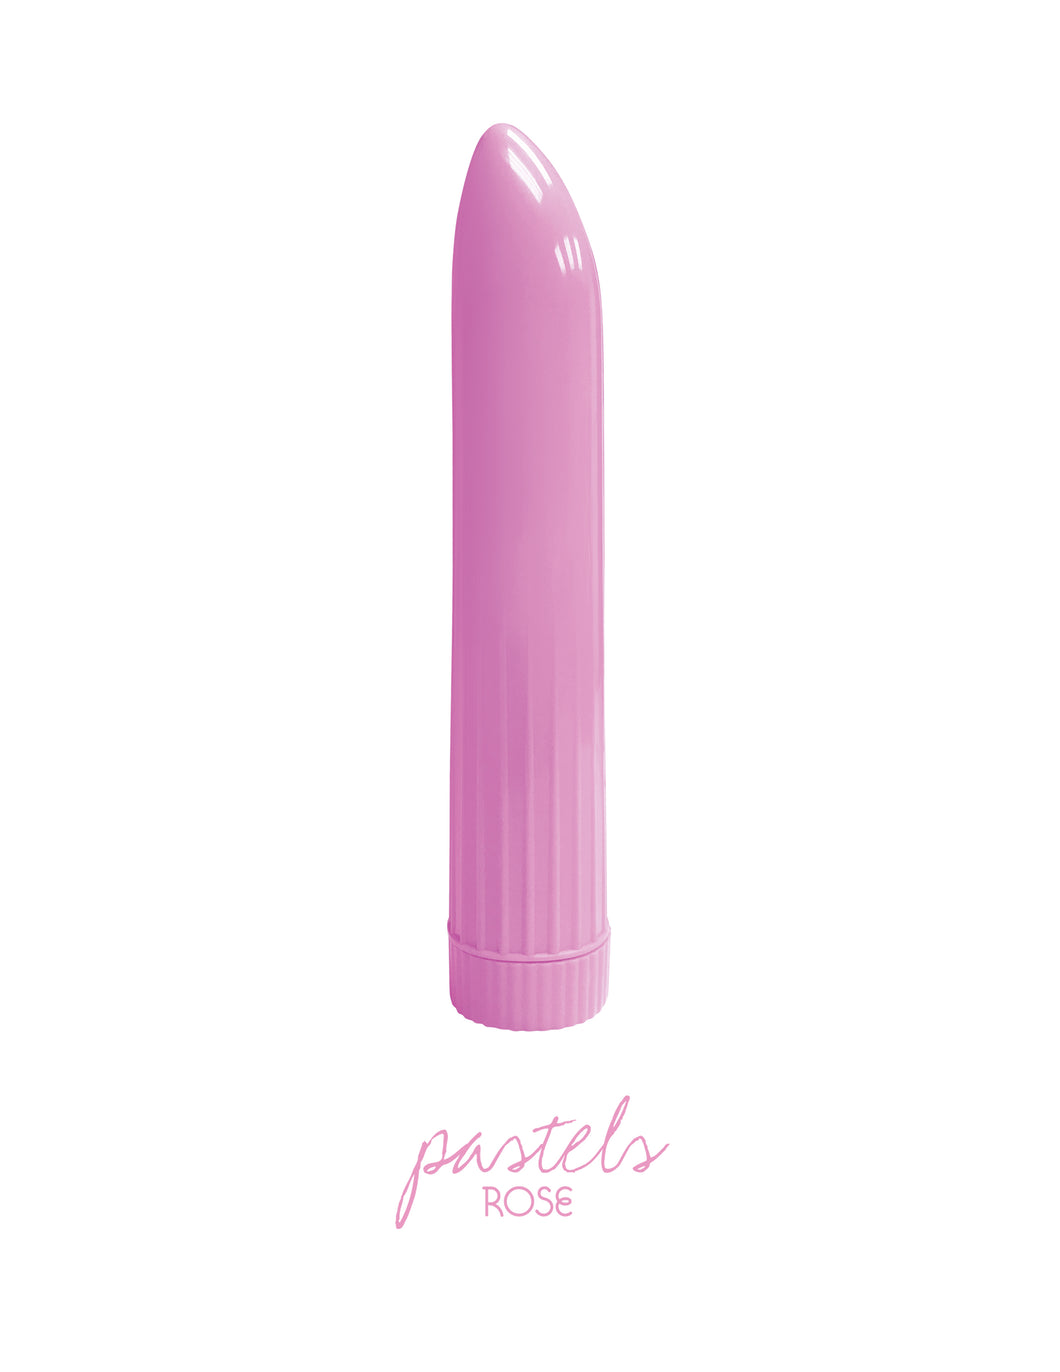 THE 9'S PASTEL VIBES ROSE